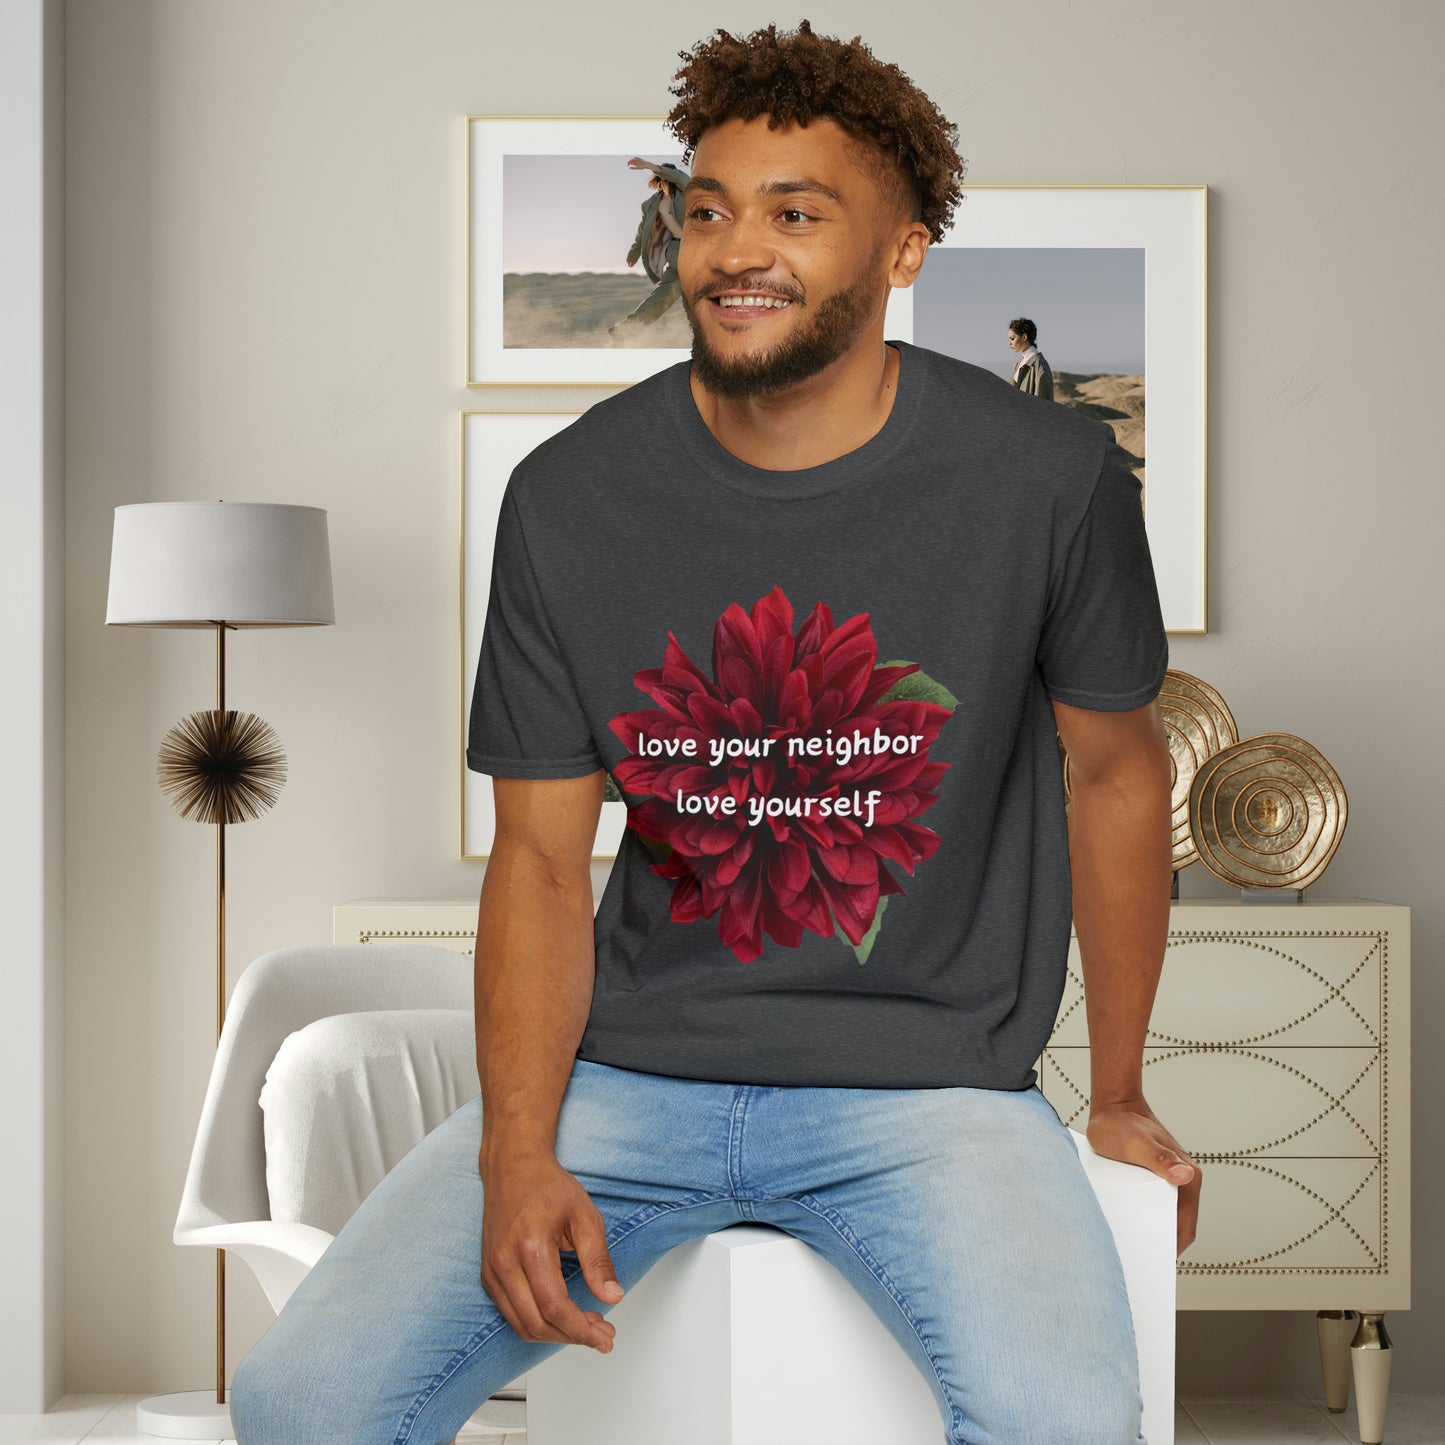 A message of “love your neighbor love yourself” over a beautiful red flower. This is a Unisex Softstyle T-Shirt.